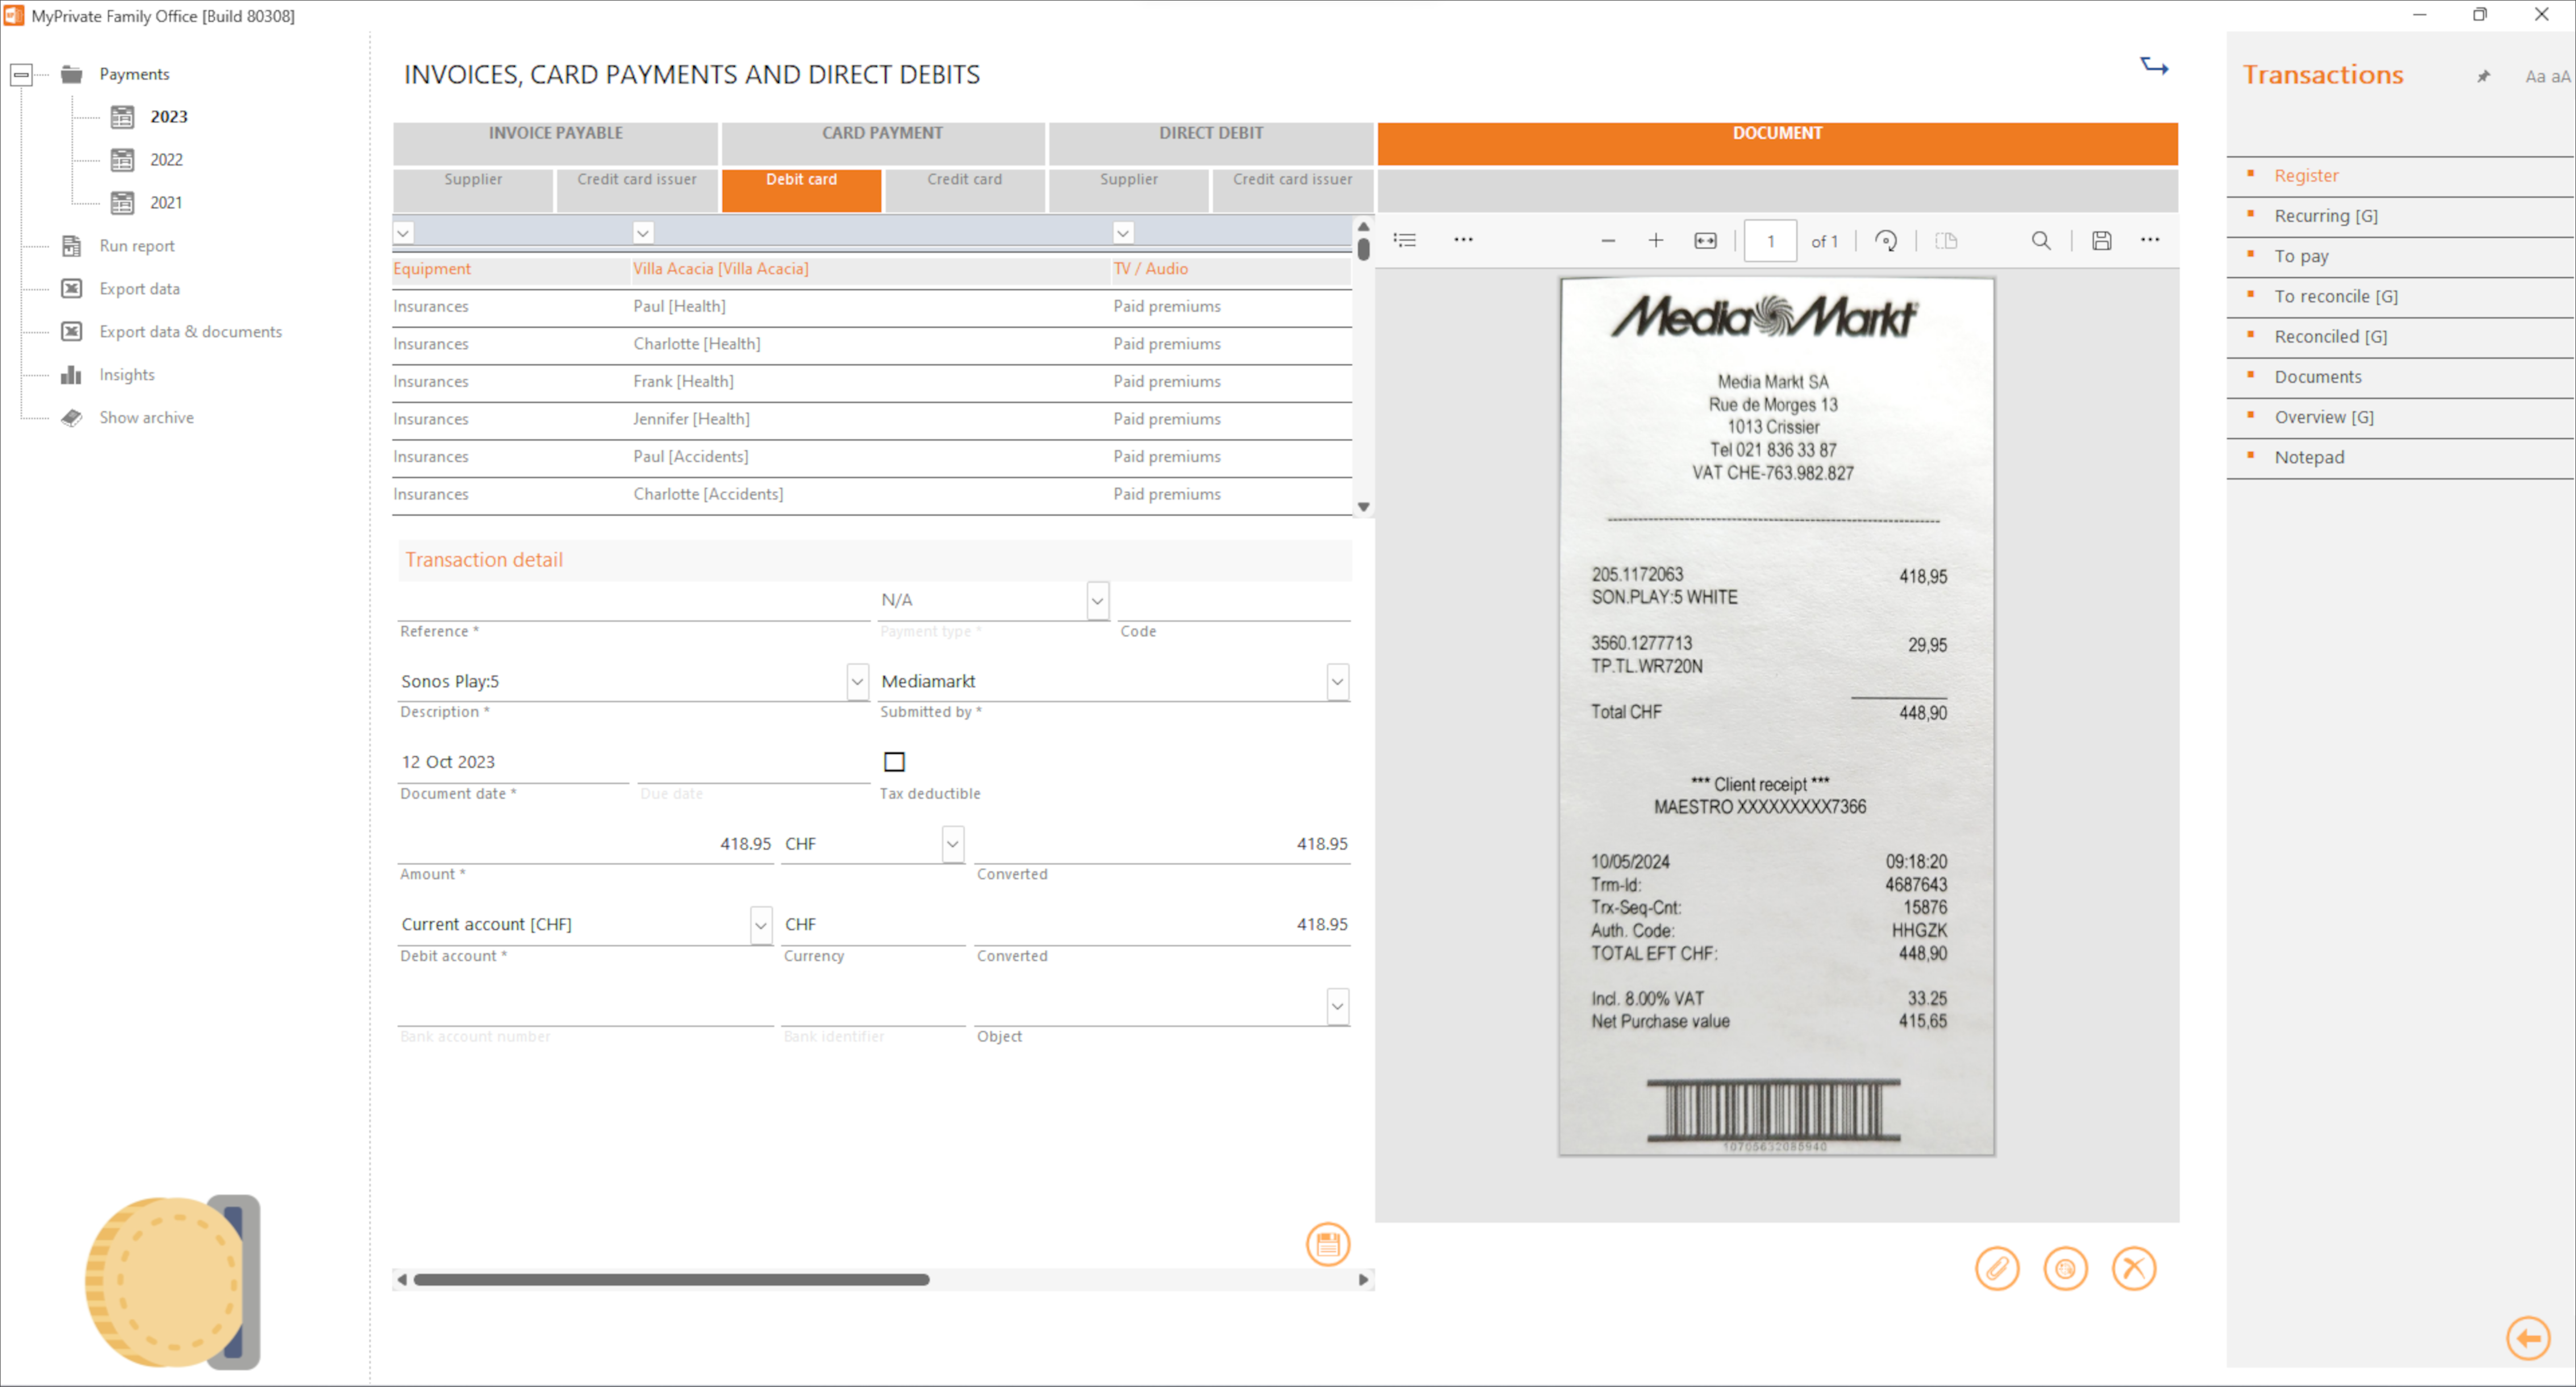 2 - Invoice and Card Spend Pürocessing